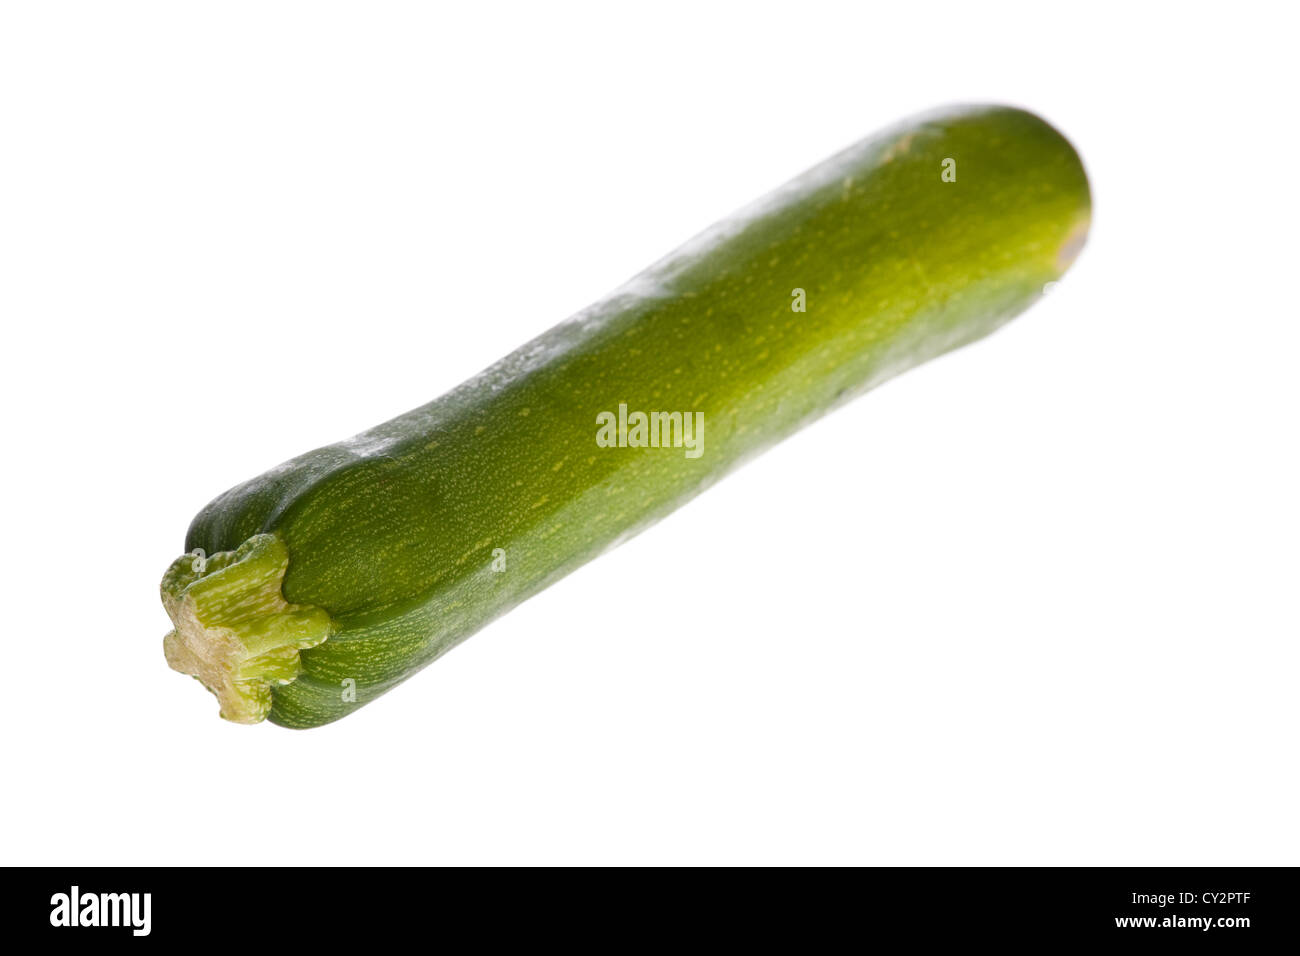 zucchini or courgette isolated on a white background Stock Photo